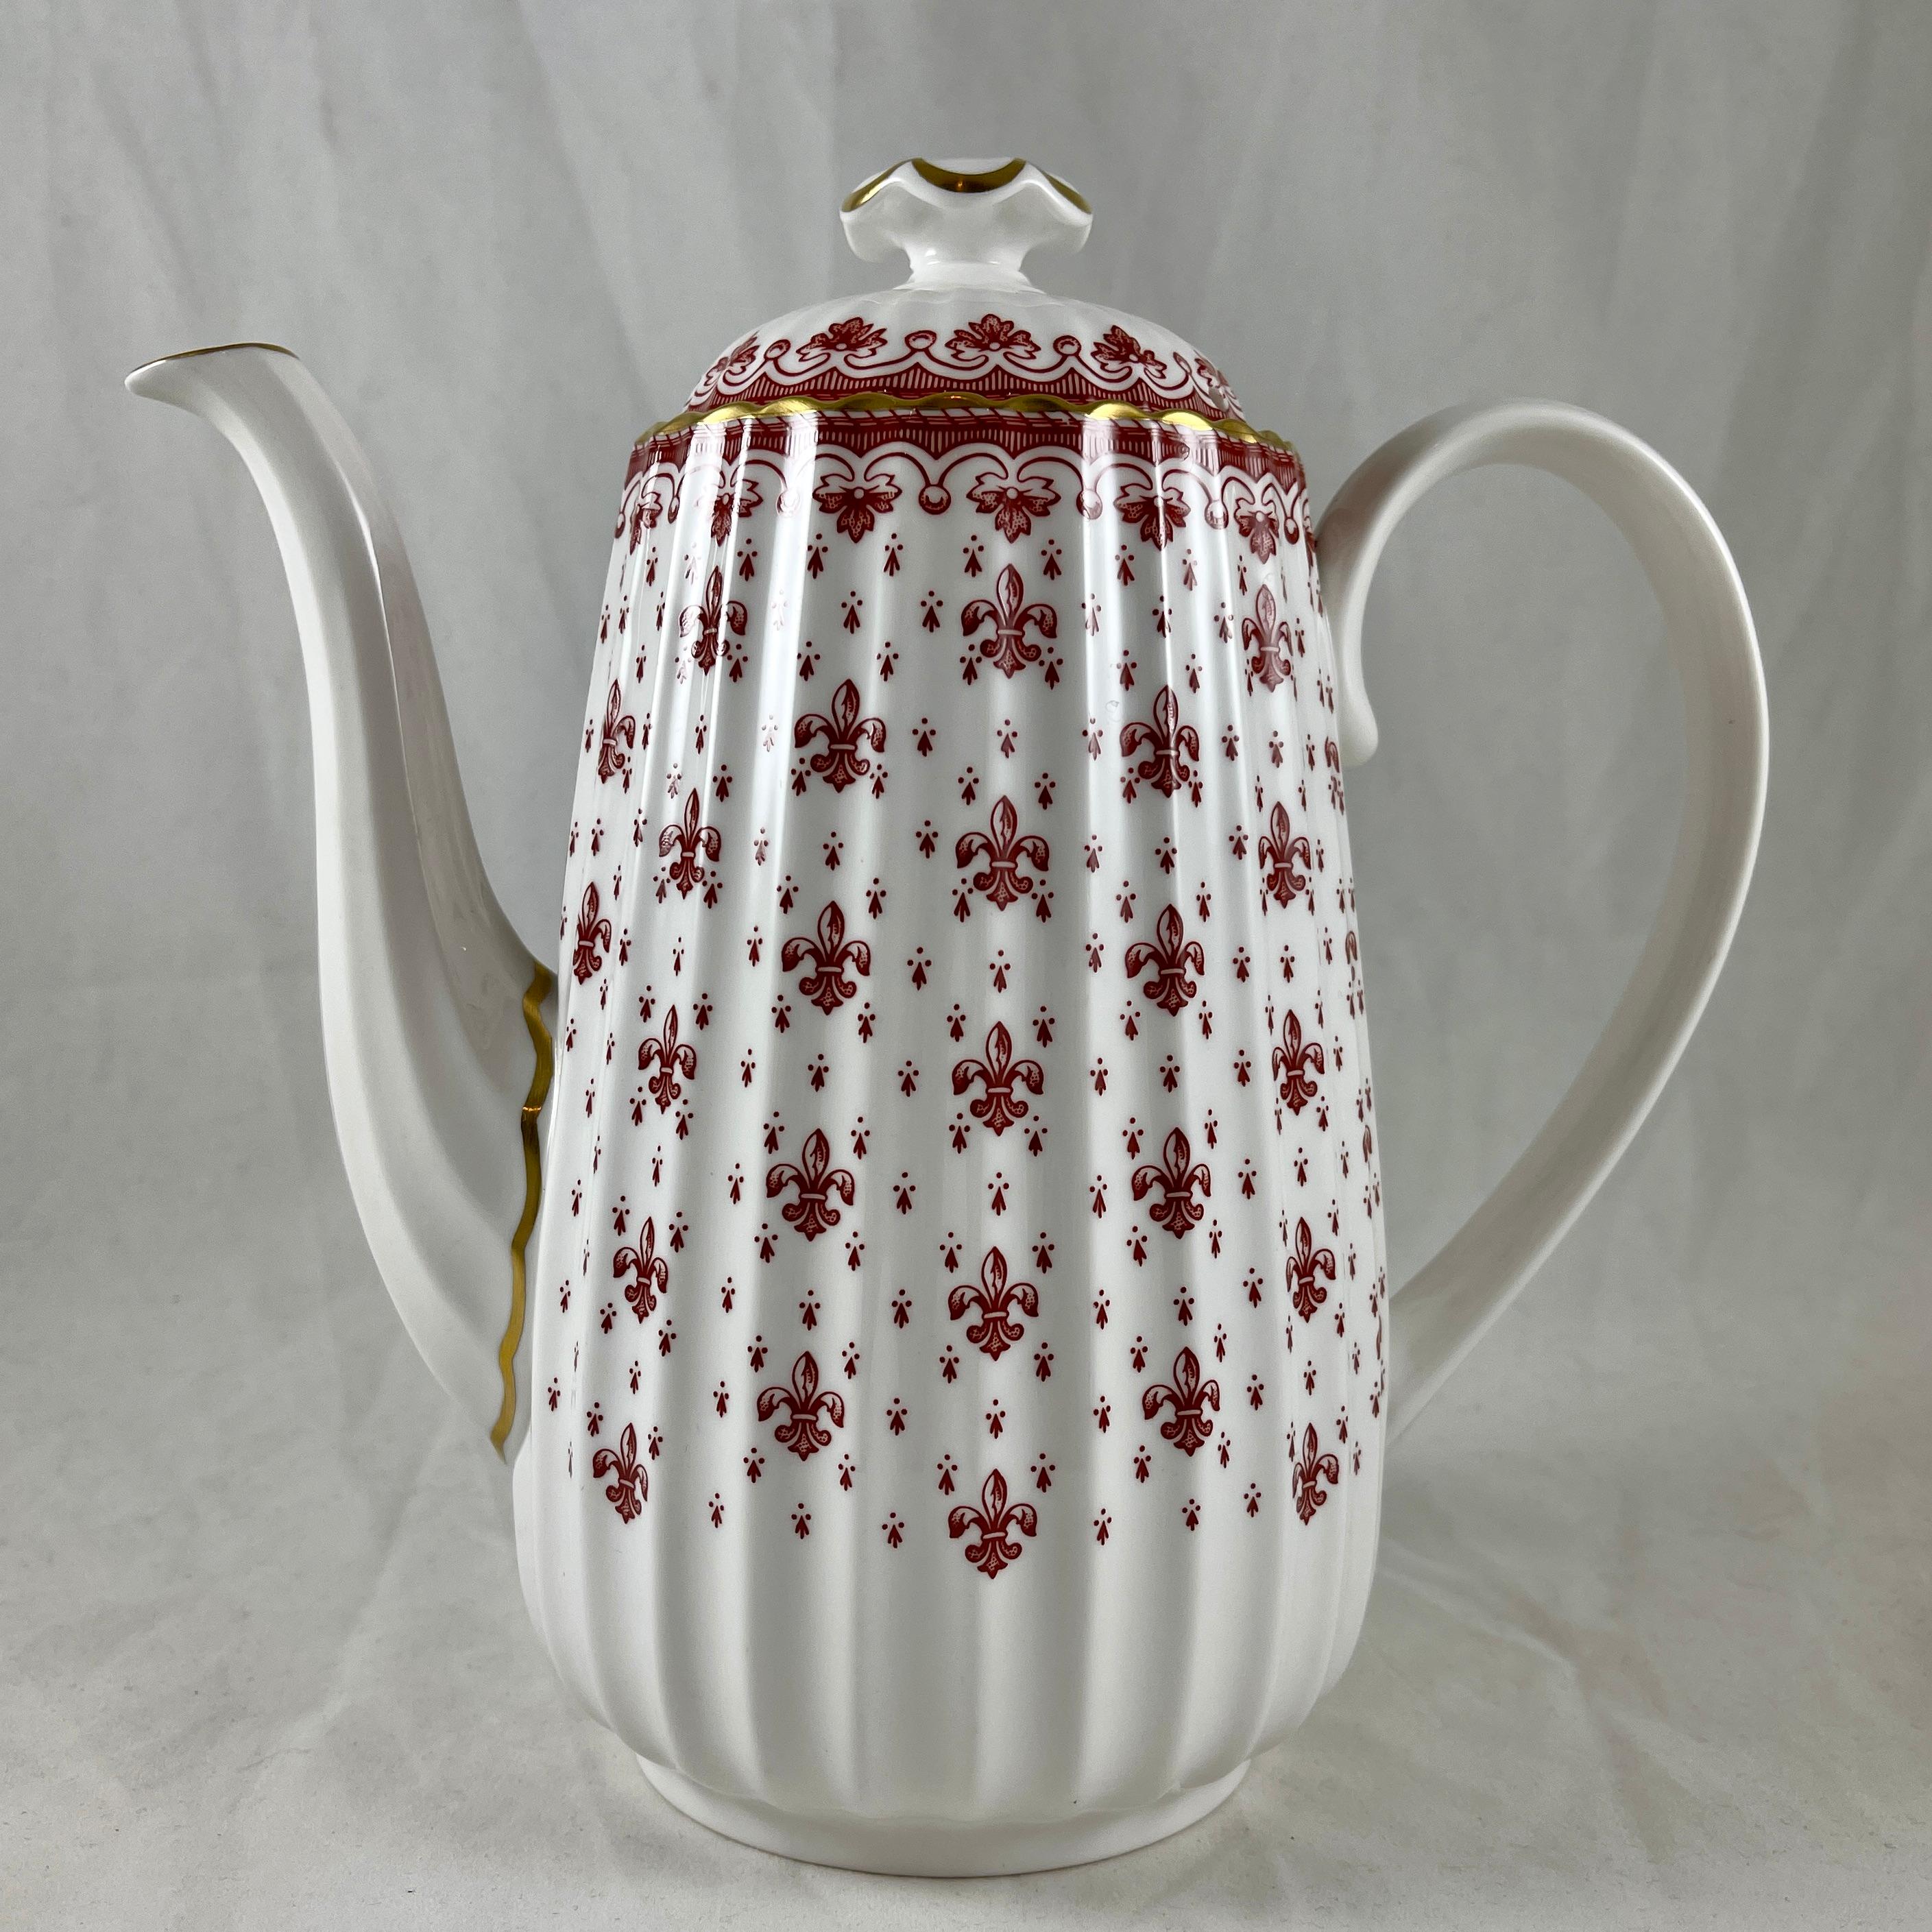 From Spode, England, a Fleur De Lys-Red Coffee Pot in the fluted Chelsea shape.

The Fleur de Lys pattern was introduced in 1961 and remained active until 1994, now discontinued.

A bone china coffee pot and lid, transfer printed in a